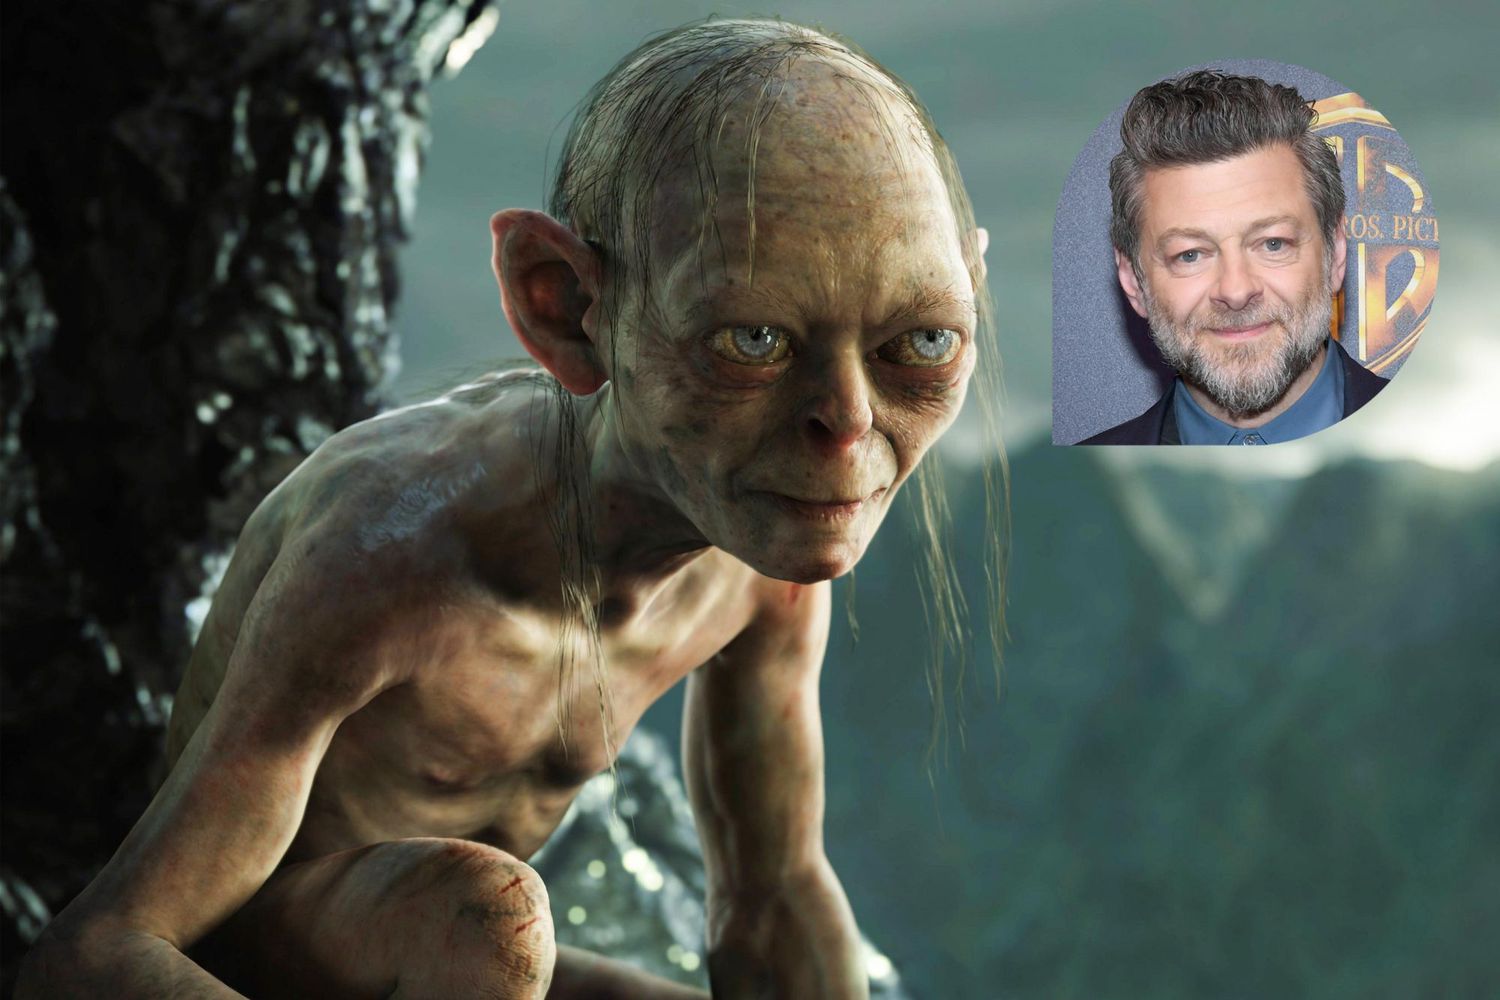 Anything You Can Andy Serkis on The Lord of the Rings | EW.com